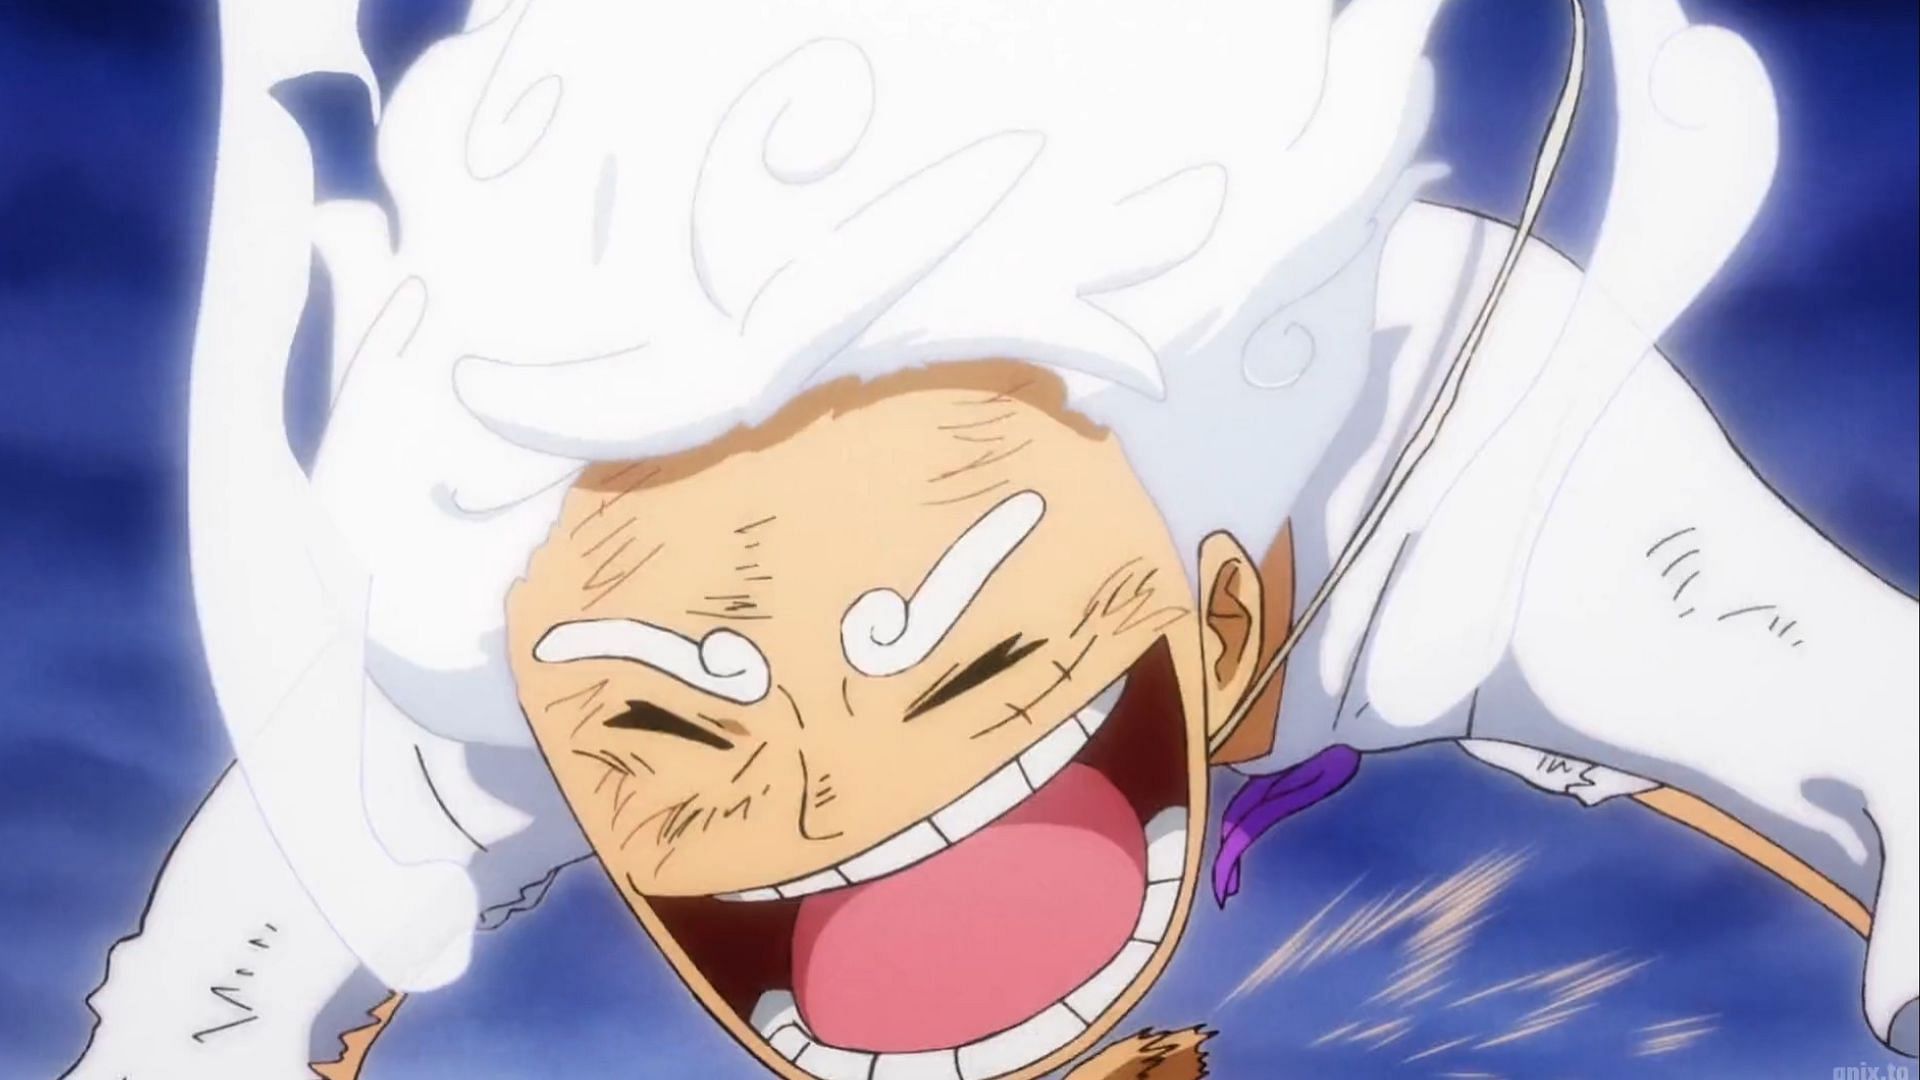 One Piece Episode 1071 Shatters Internet Records with Luffy's Gear 5 Debut